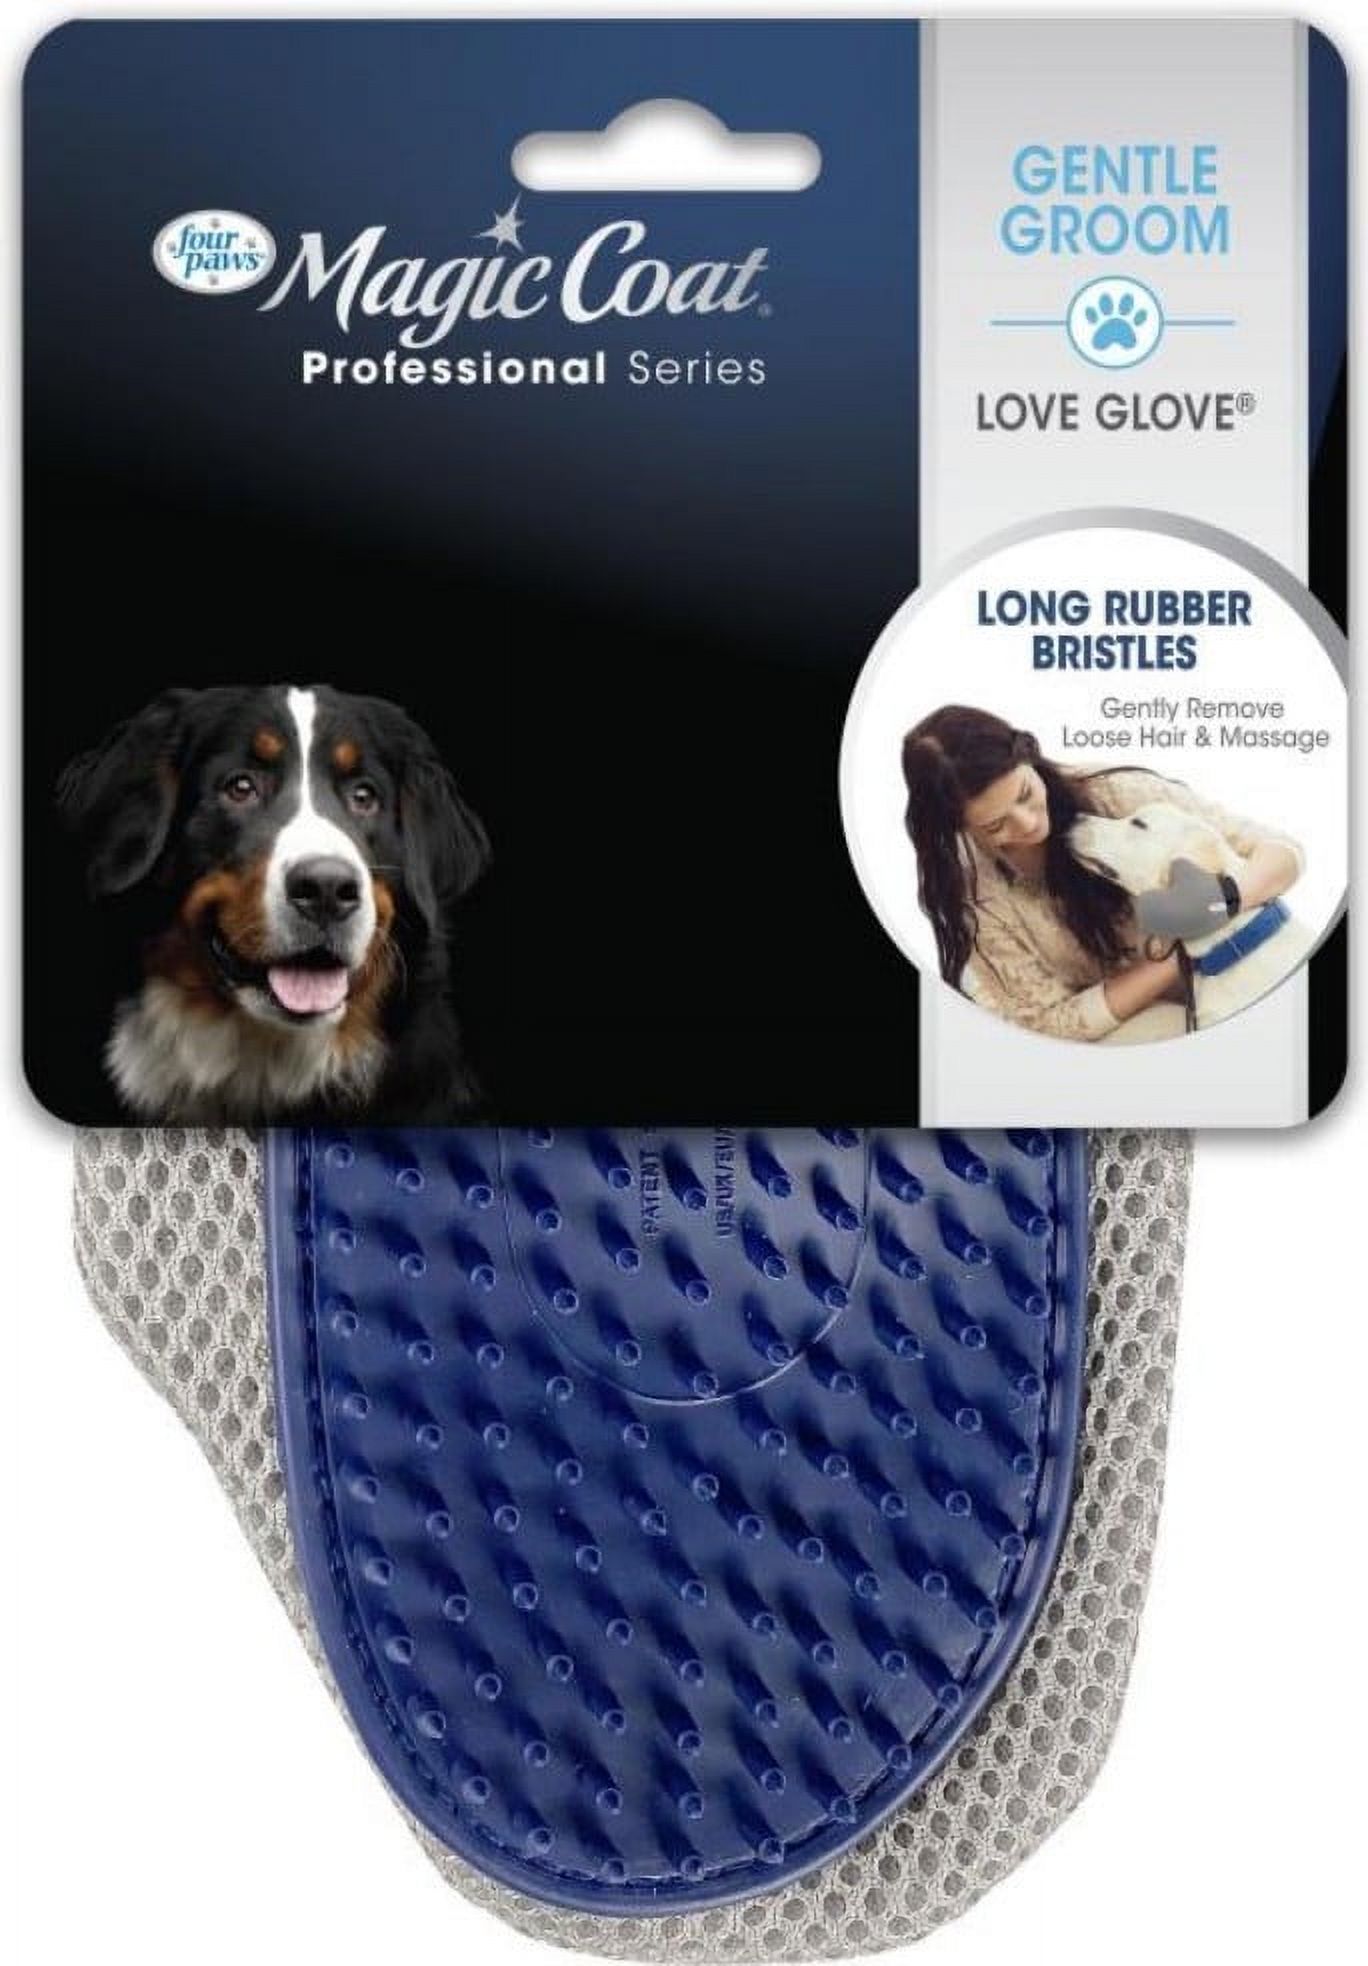 Four Paws Magic Coat Professional Series Gentle Groom Love Glove - image 1 of 2